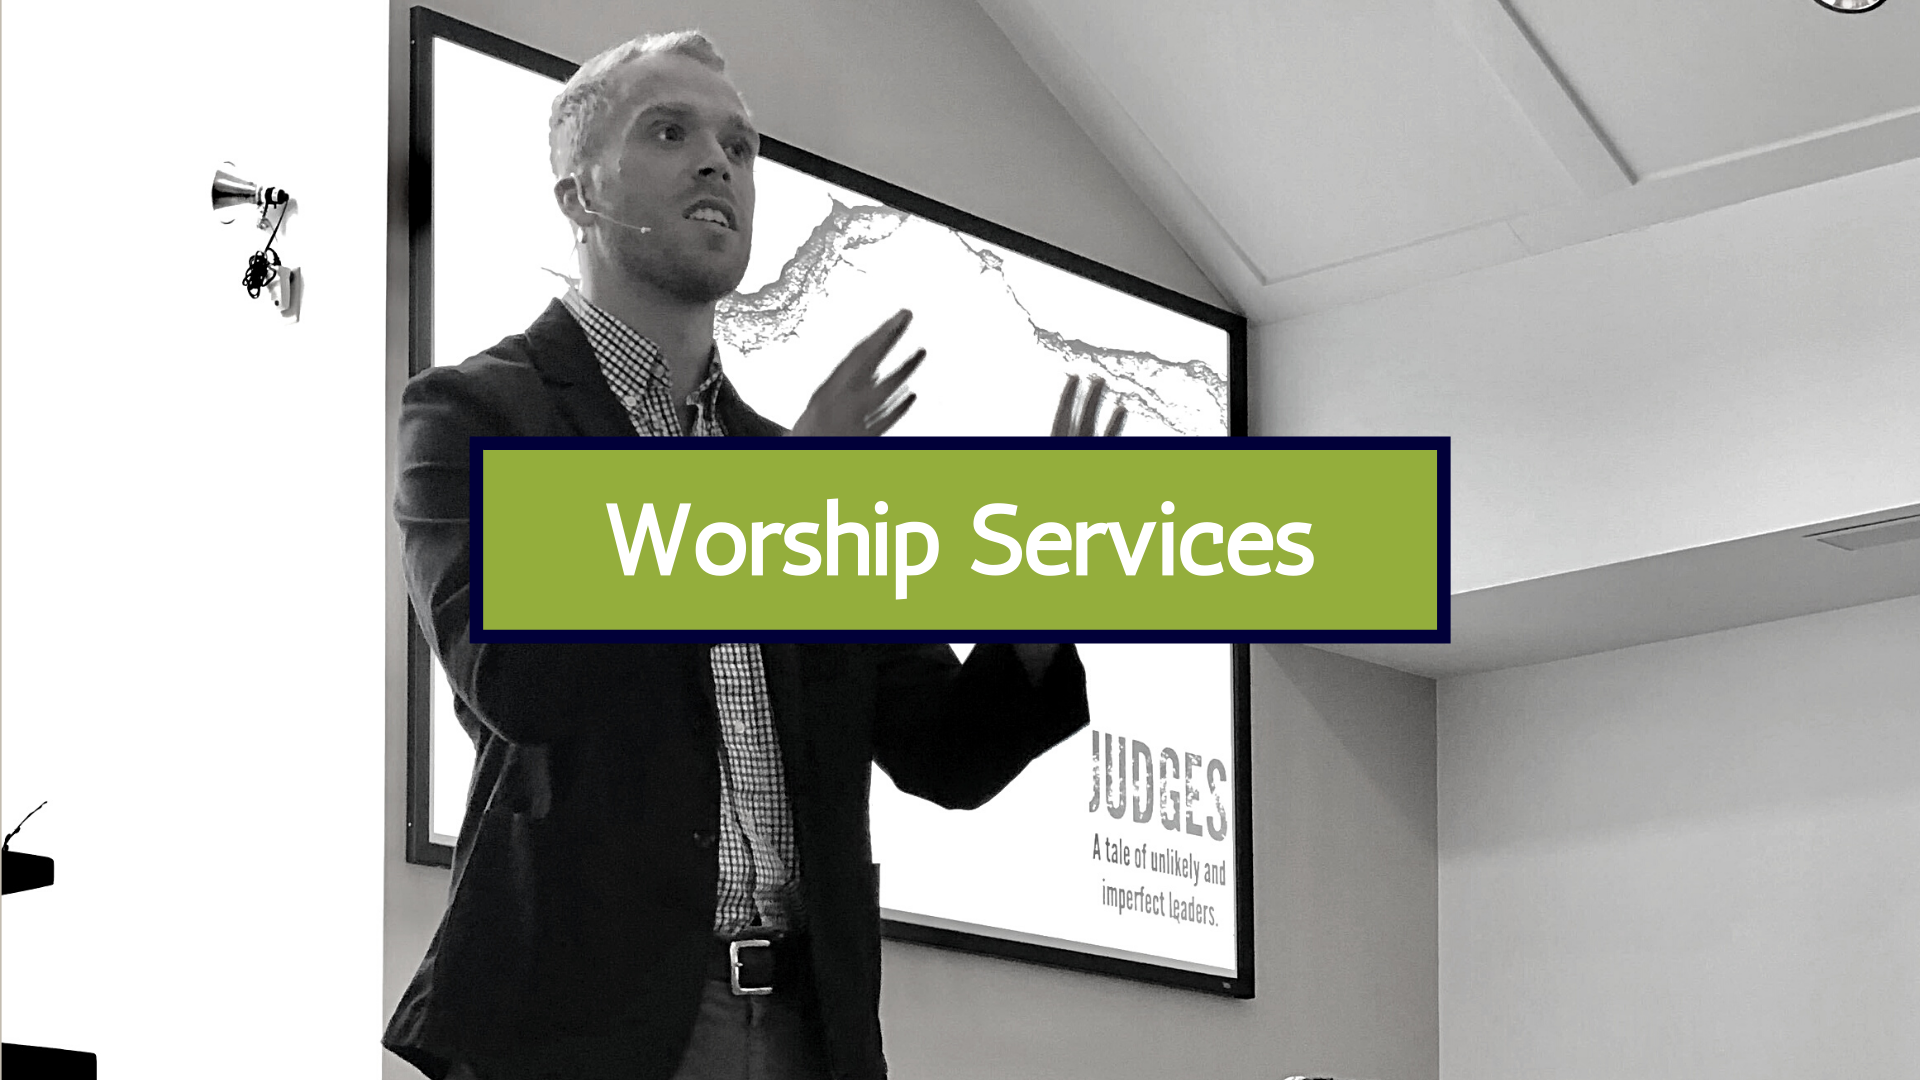 Link to Worship Services on YouTube